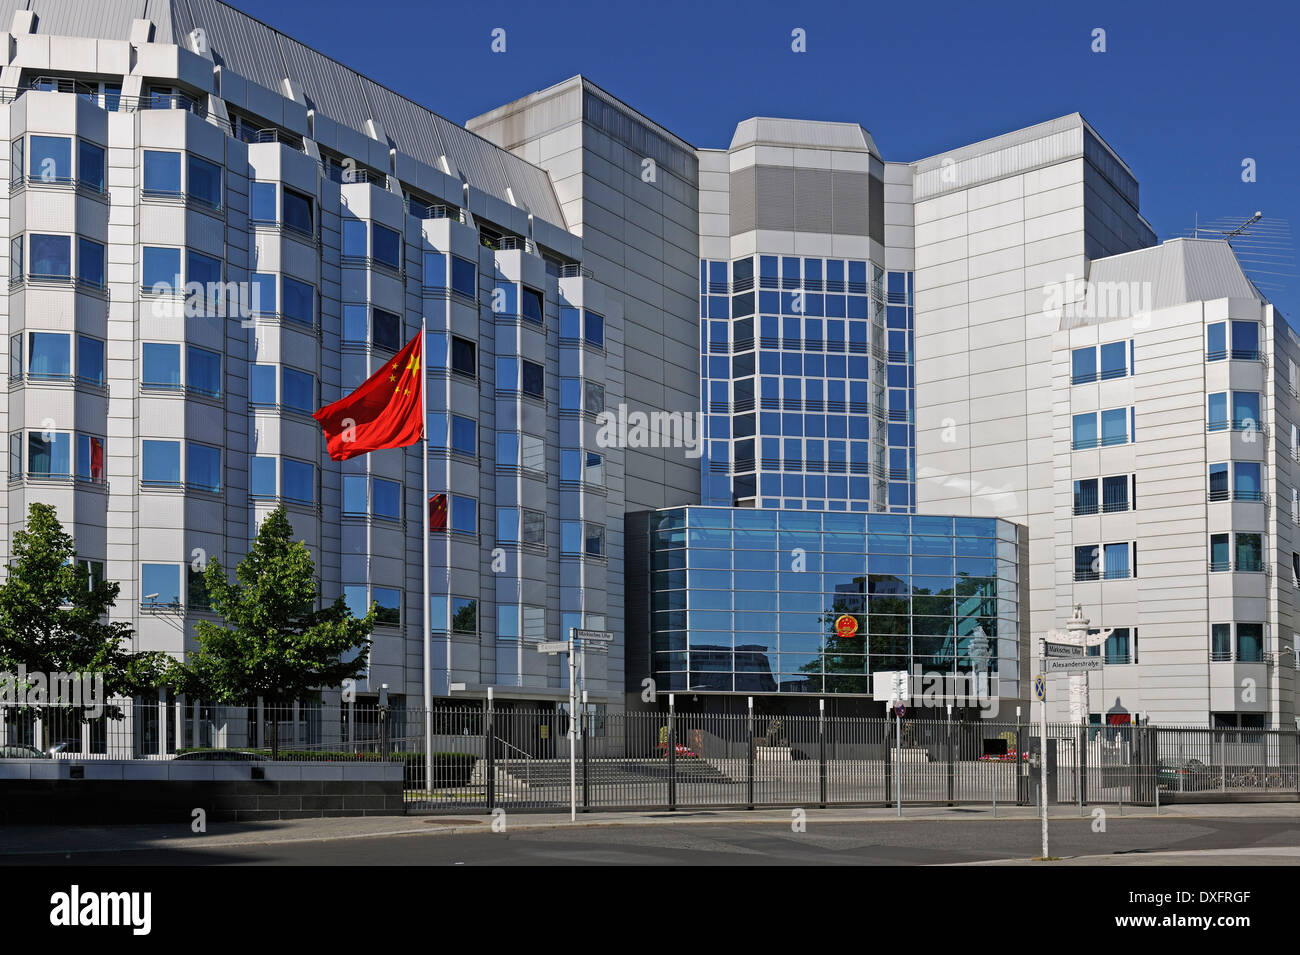 Embassy of the People's Republic of China, Mitte quarter, Berlin, Germany Stock Photo